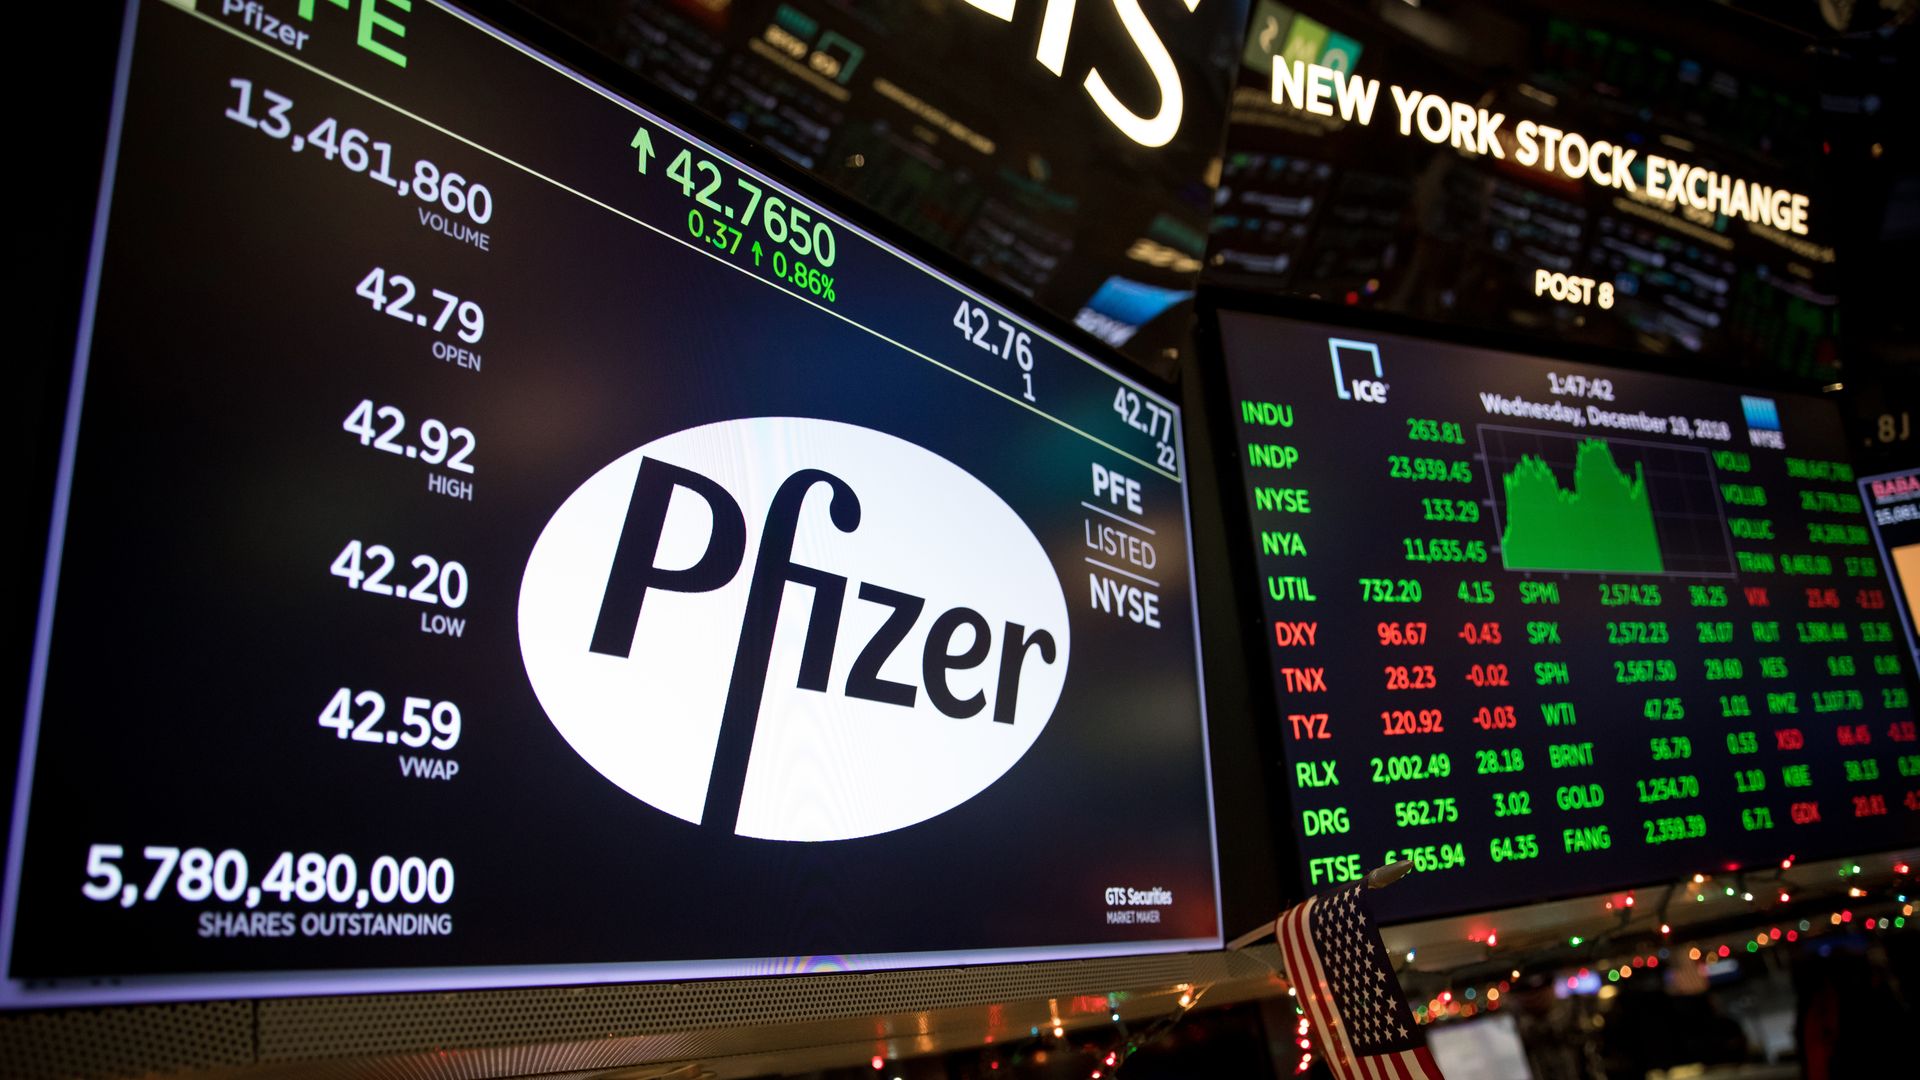 A white Pfizer logo on a computer screen on the Wall Street trading floor.